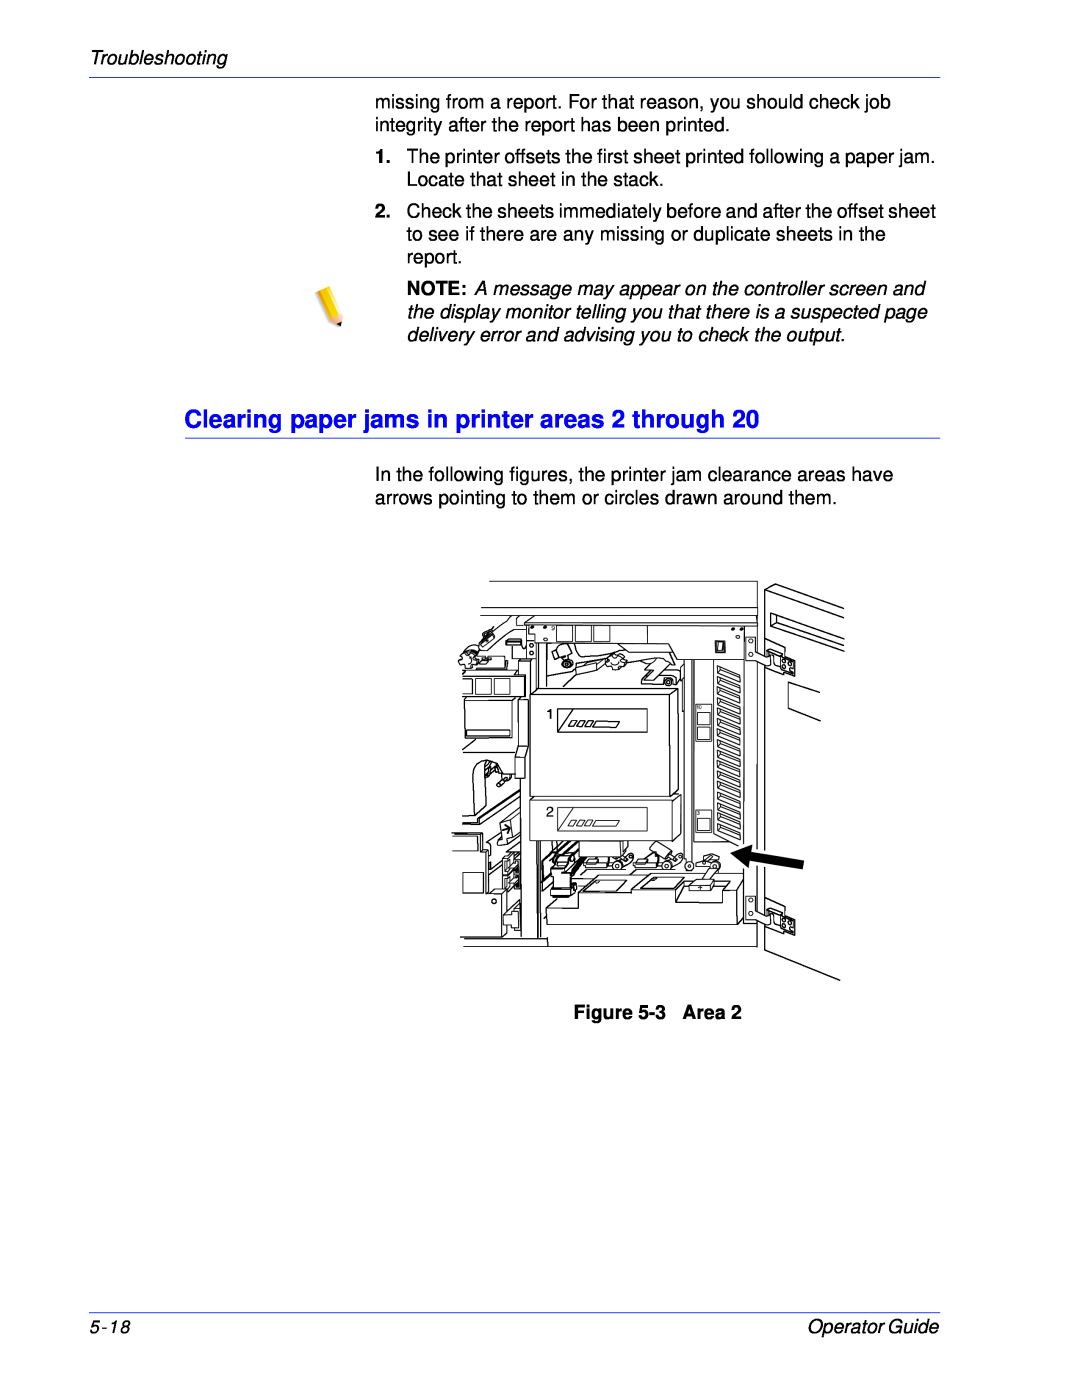 Xerox 100, 180 EPS manual Clearing paper jams in printer areas 2 through, Troubleshooting, 3Area 